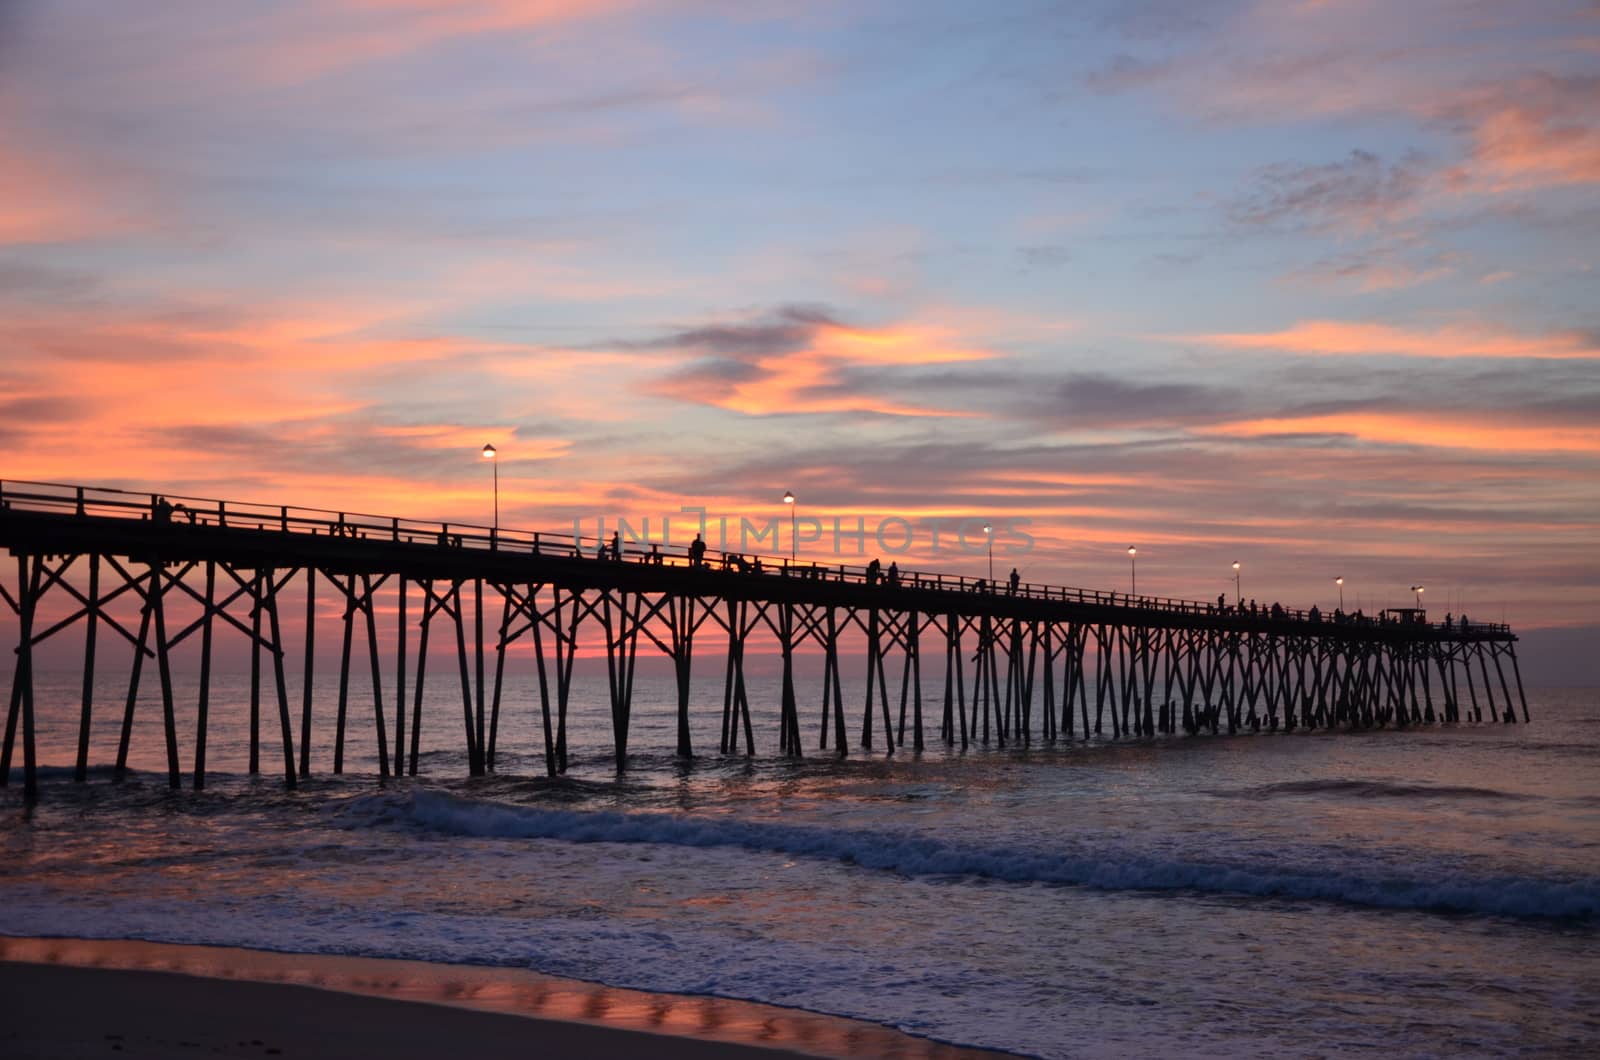 Morning along the Pier by northwoodsphoto